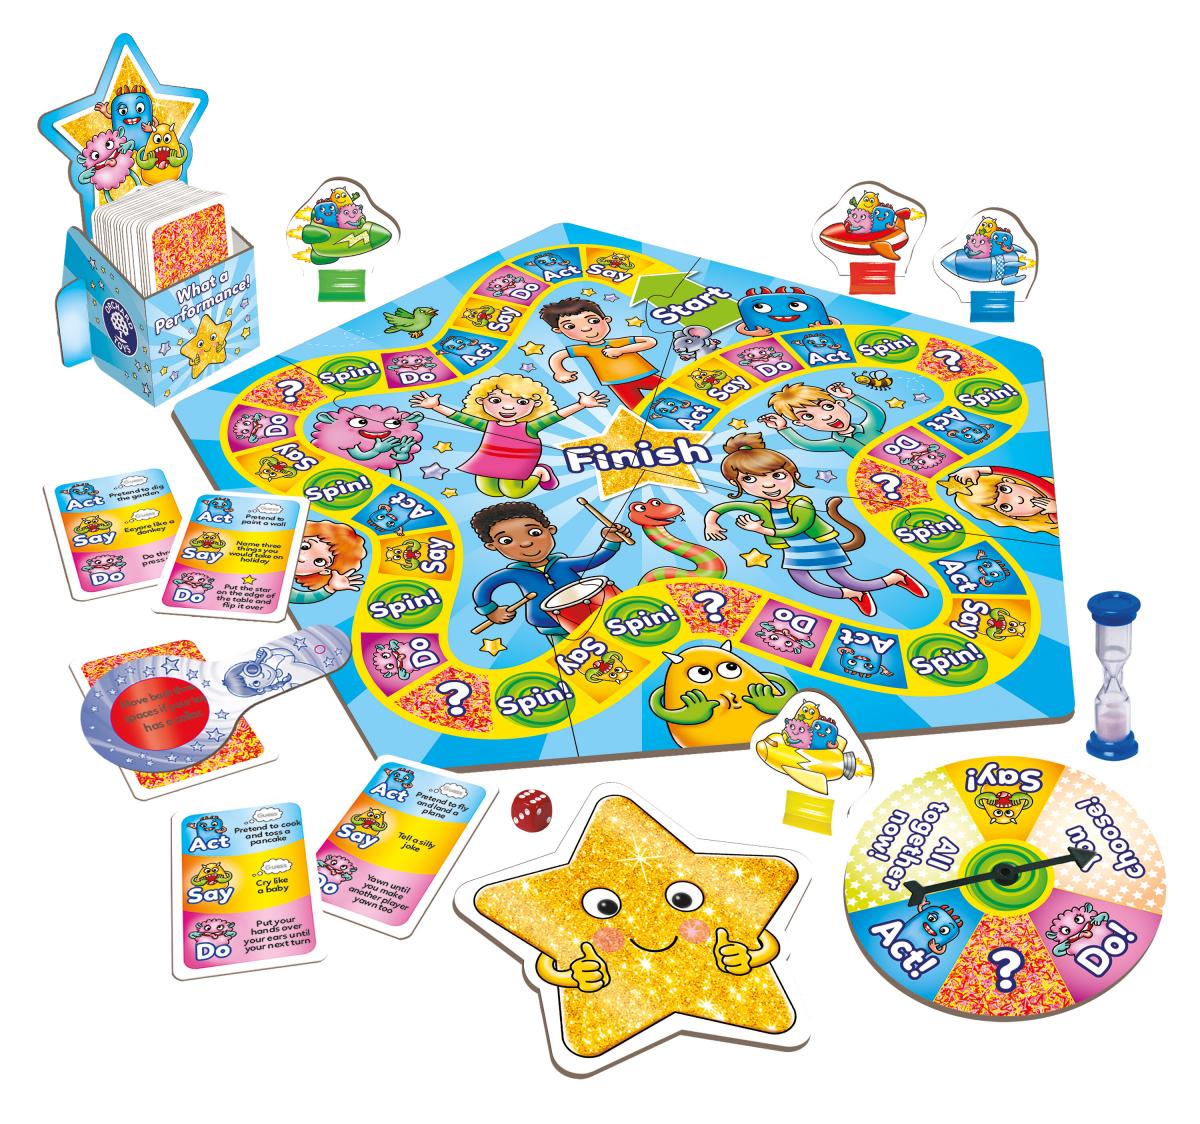 Orchard Toys What A Performance Board Game 模仿大賽家庭遊戲